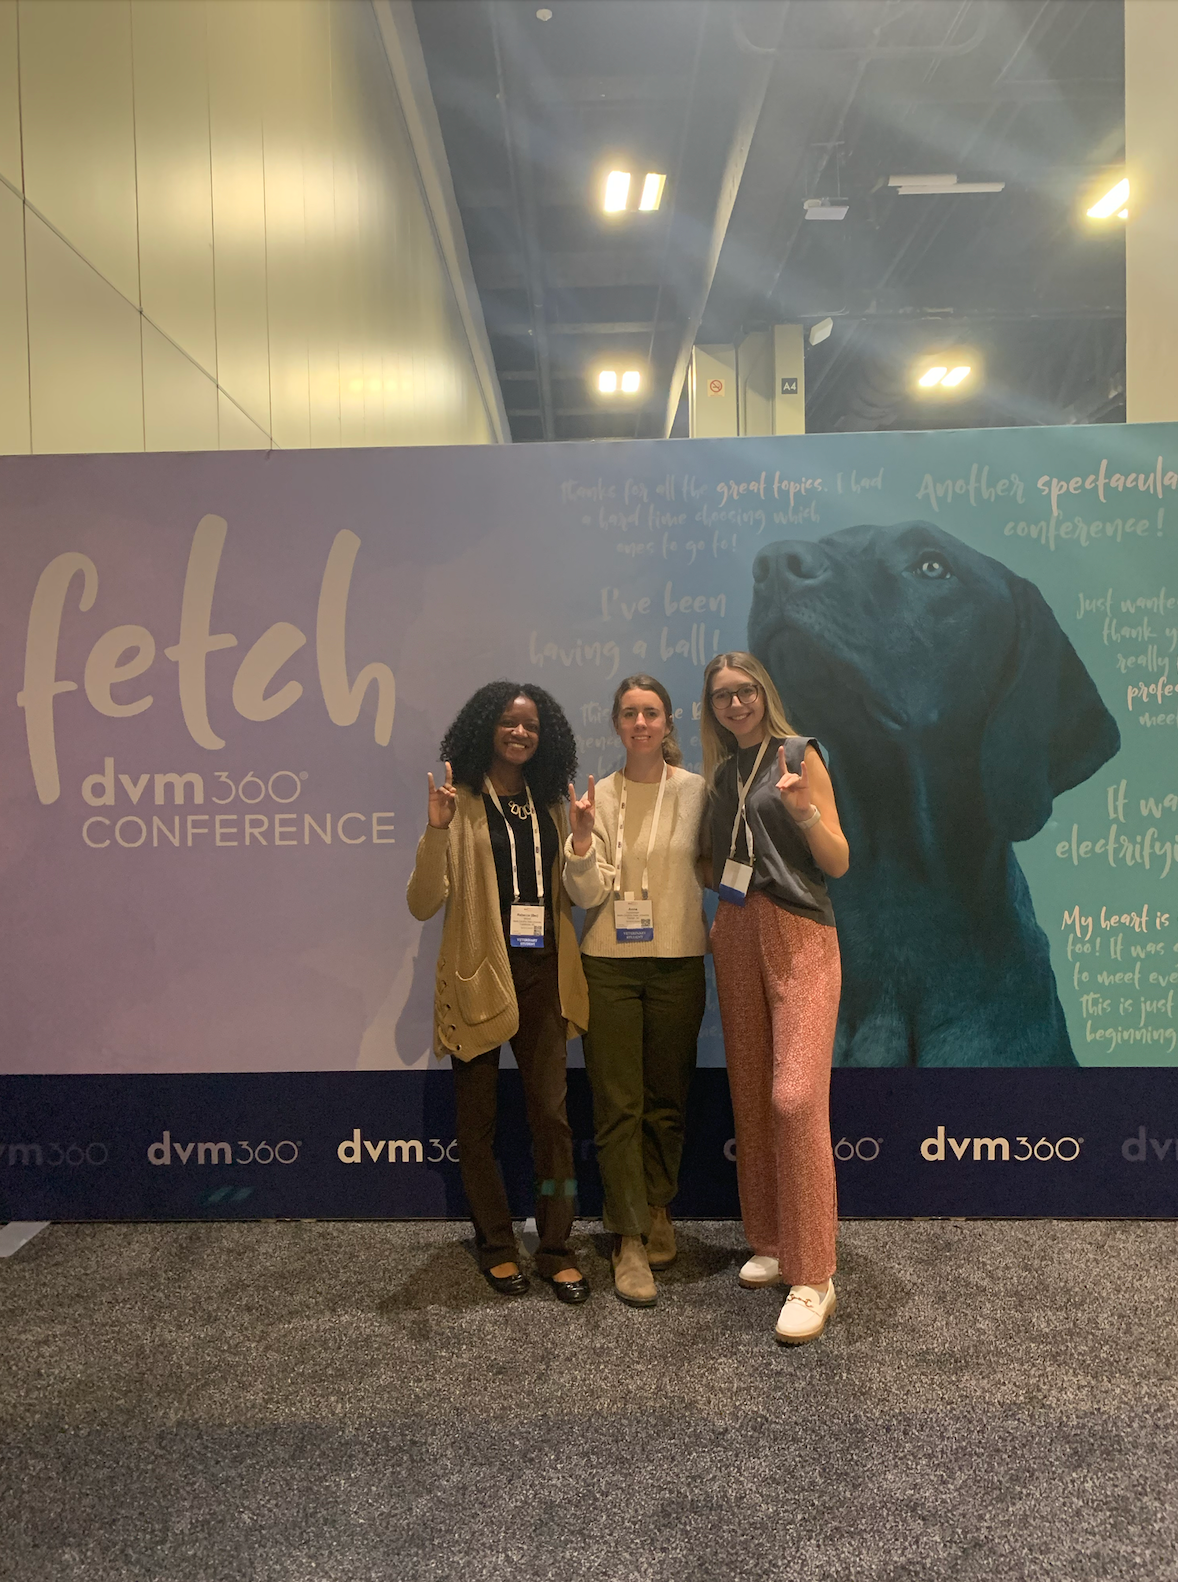 From classroom to conference: Insights from a veterinary student at Fetch Charlotte